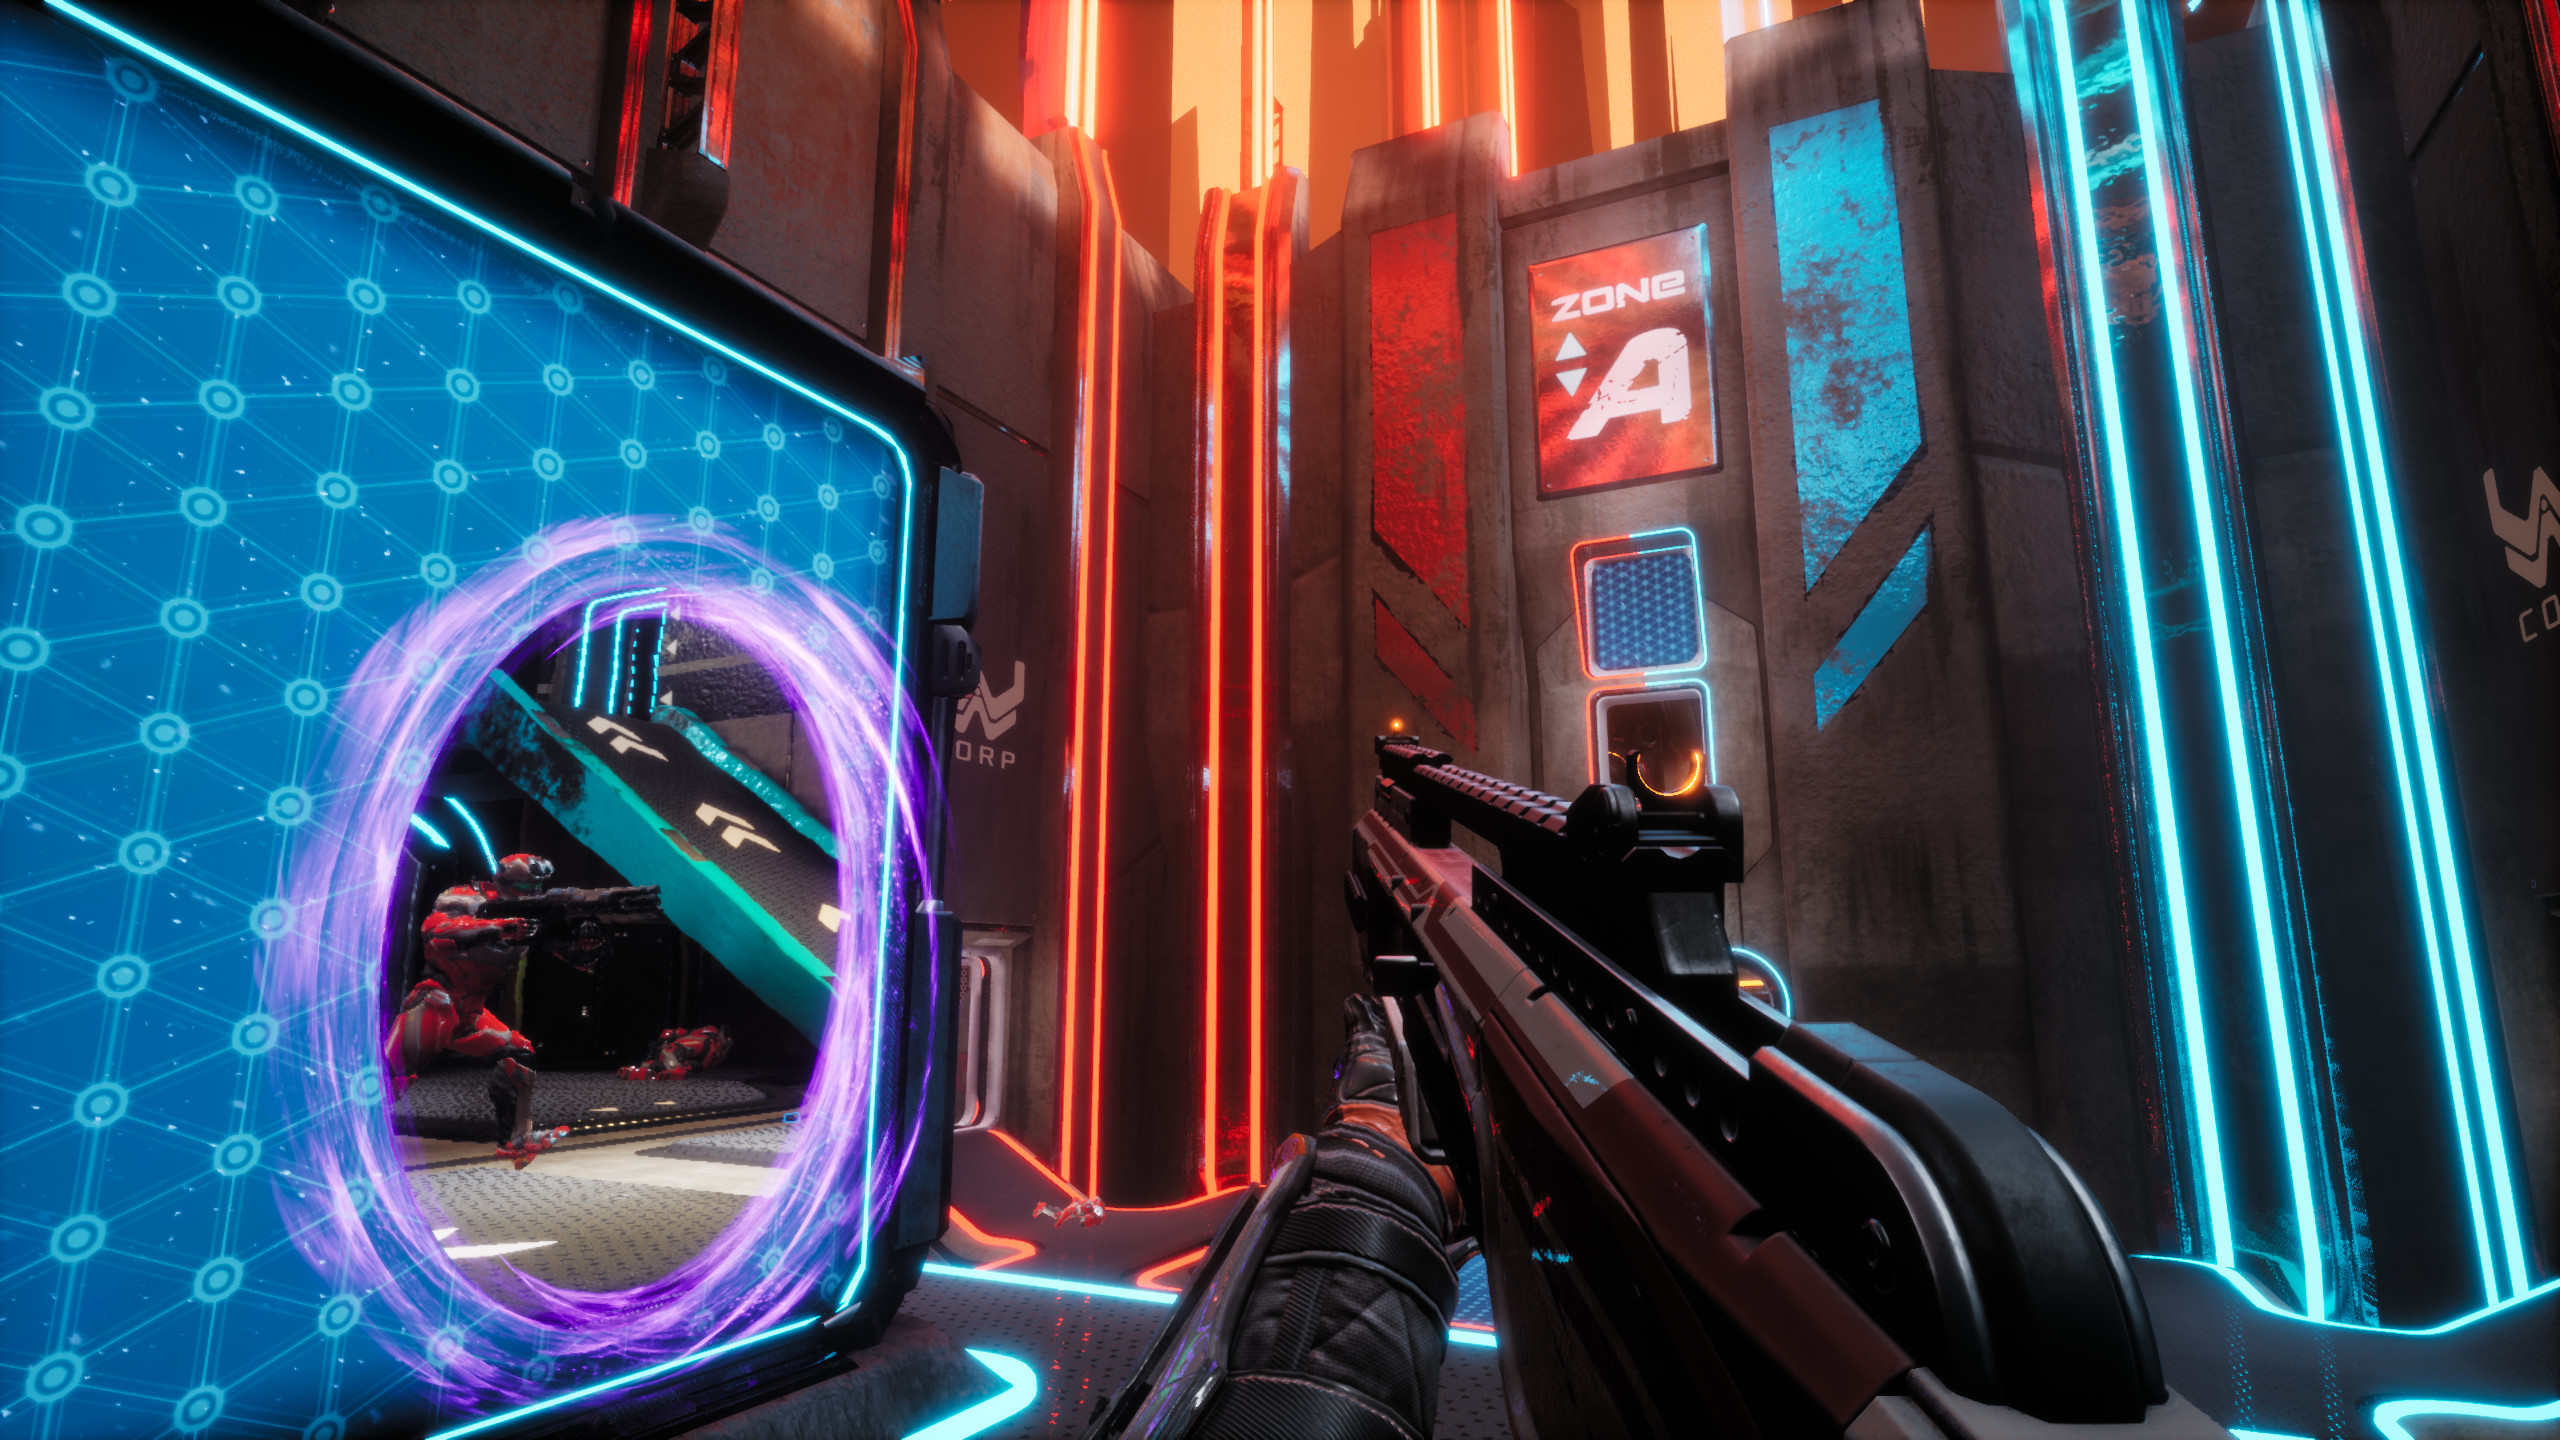 Splitgate is trying to bring back the arena shooter by mixing Halo, Portal, and Rocket League